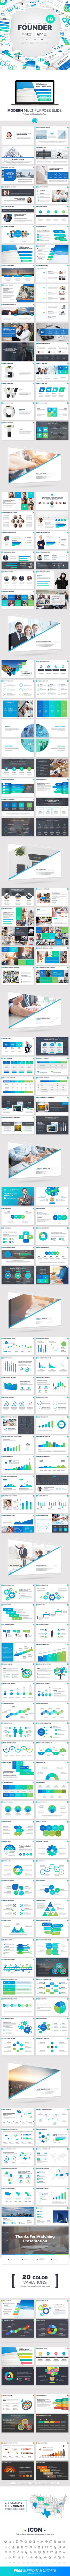 Founder Powerpoint Template